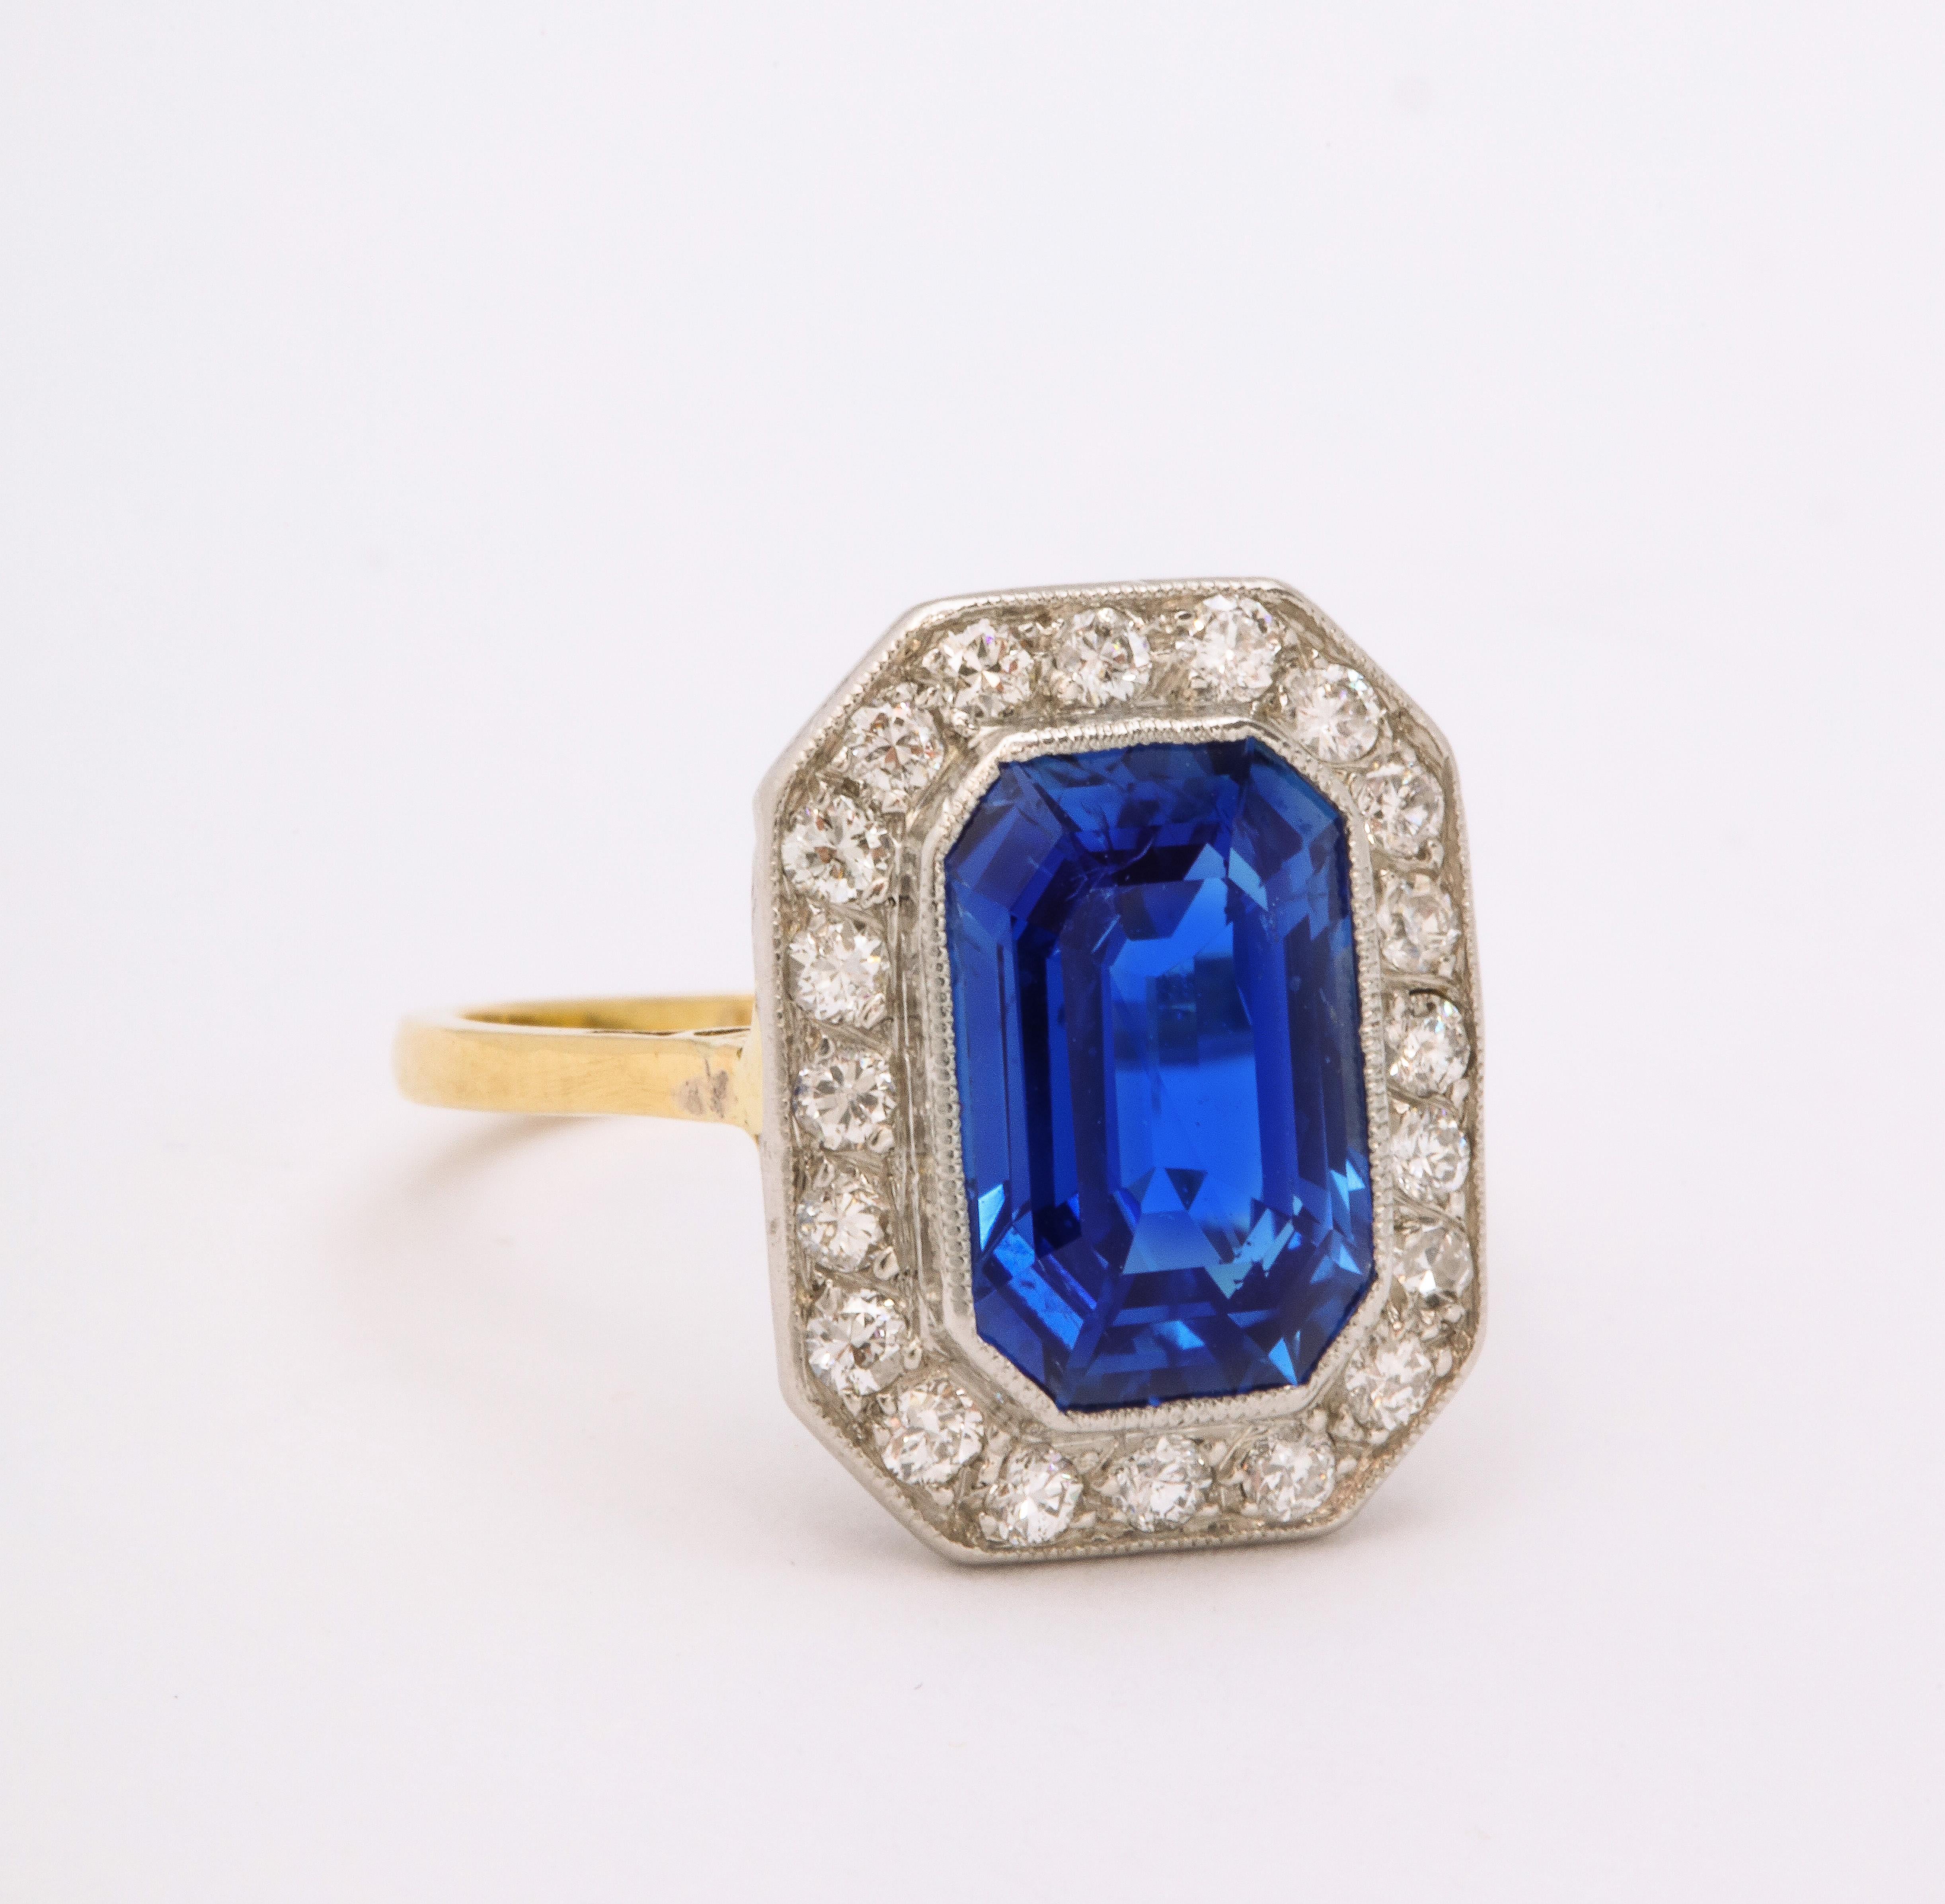 Edwardian Emerald Cut Burmese Sapphire Diamond Yellow and White Gold Ring. Size 4 1/2,easily sized by your jeweler or us

Materials:
18K yellow & white gold
2.5 dwt
Unmarked but tested

Stones:
Burmese Sapphire untreated @ 9.0 carats tw
fine white